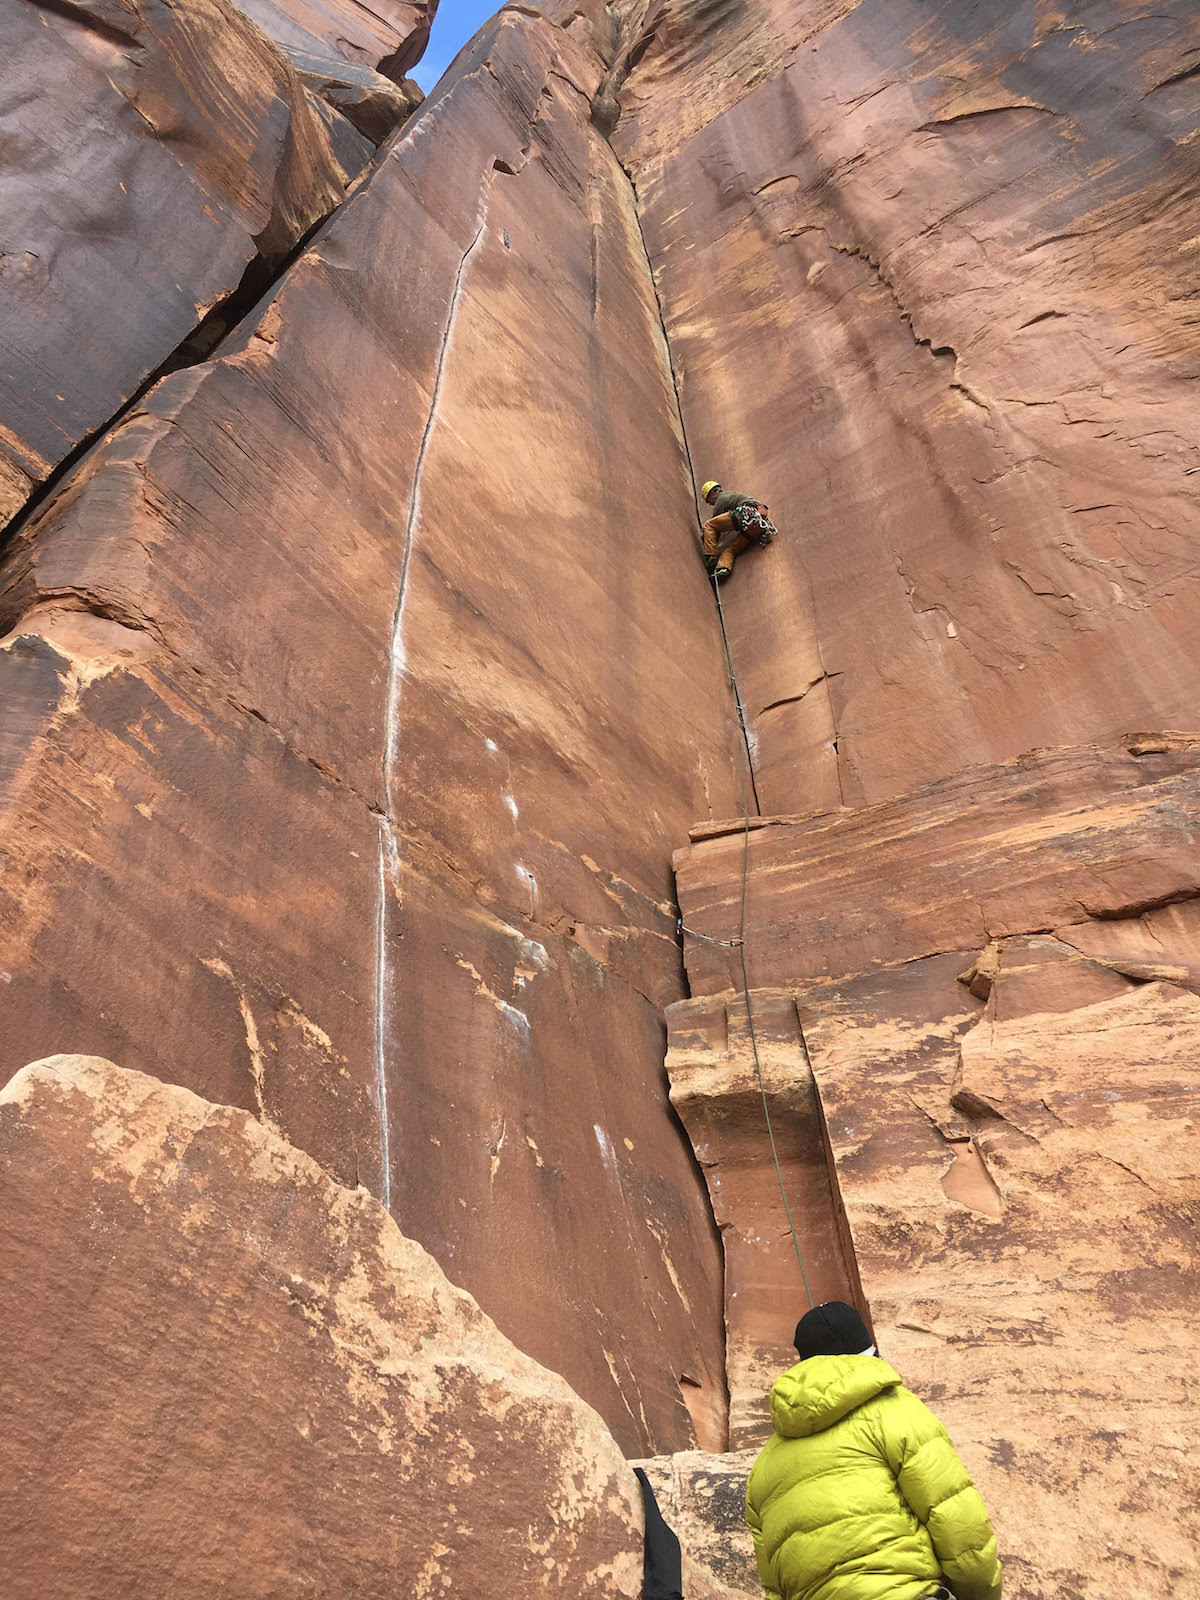 A climber leads Three Strikes You're Out (5.11, 90') on the Battle of the Bulge Buttress in Indian Creek, Utah. The area is part of Bears Ears National Monument where US Interior Secretary Ryan Zinke is conducting a visit as part of his review of all national monuments designated in the last 21 years--as ordered by President Donald Trump in April. Conservation groups fear the unprecedented review could result in these monuments being rescinded or reduced. [Photo] Derek Franz